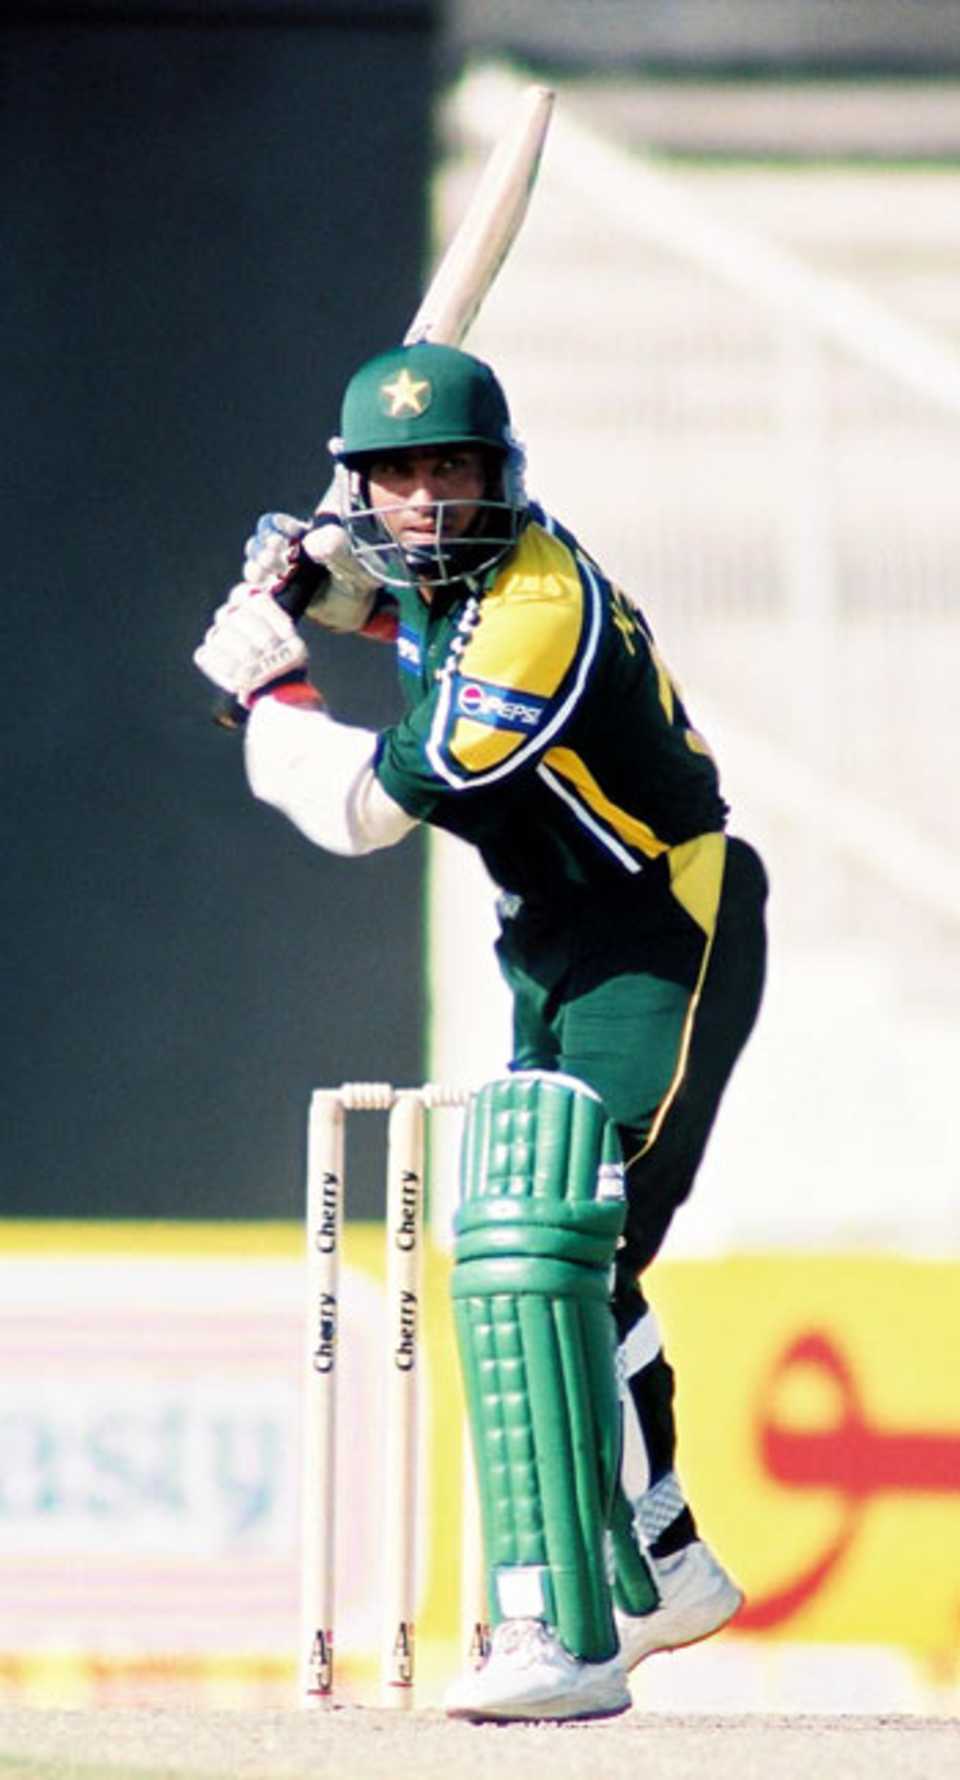 Yousuf Youhana in action, 1st Match: Pakistan v Zimbabwe, Cherry Blossom Sharjah Cup, 3 April 2003